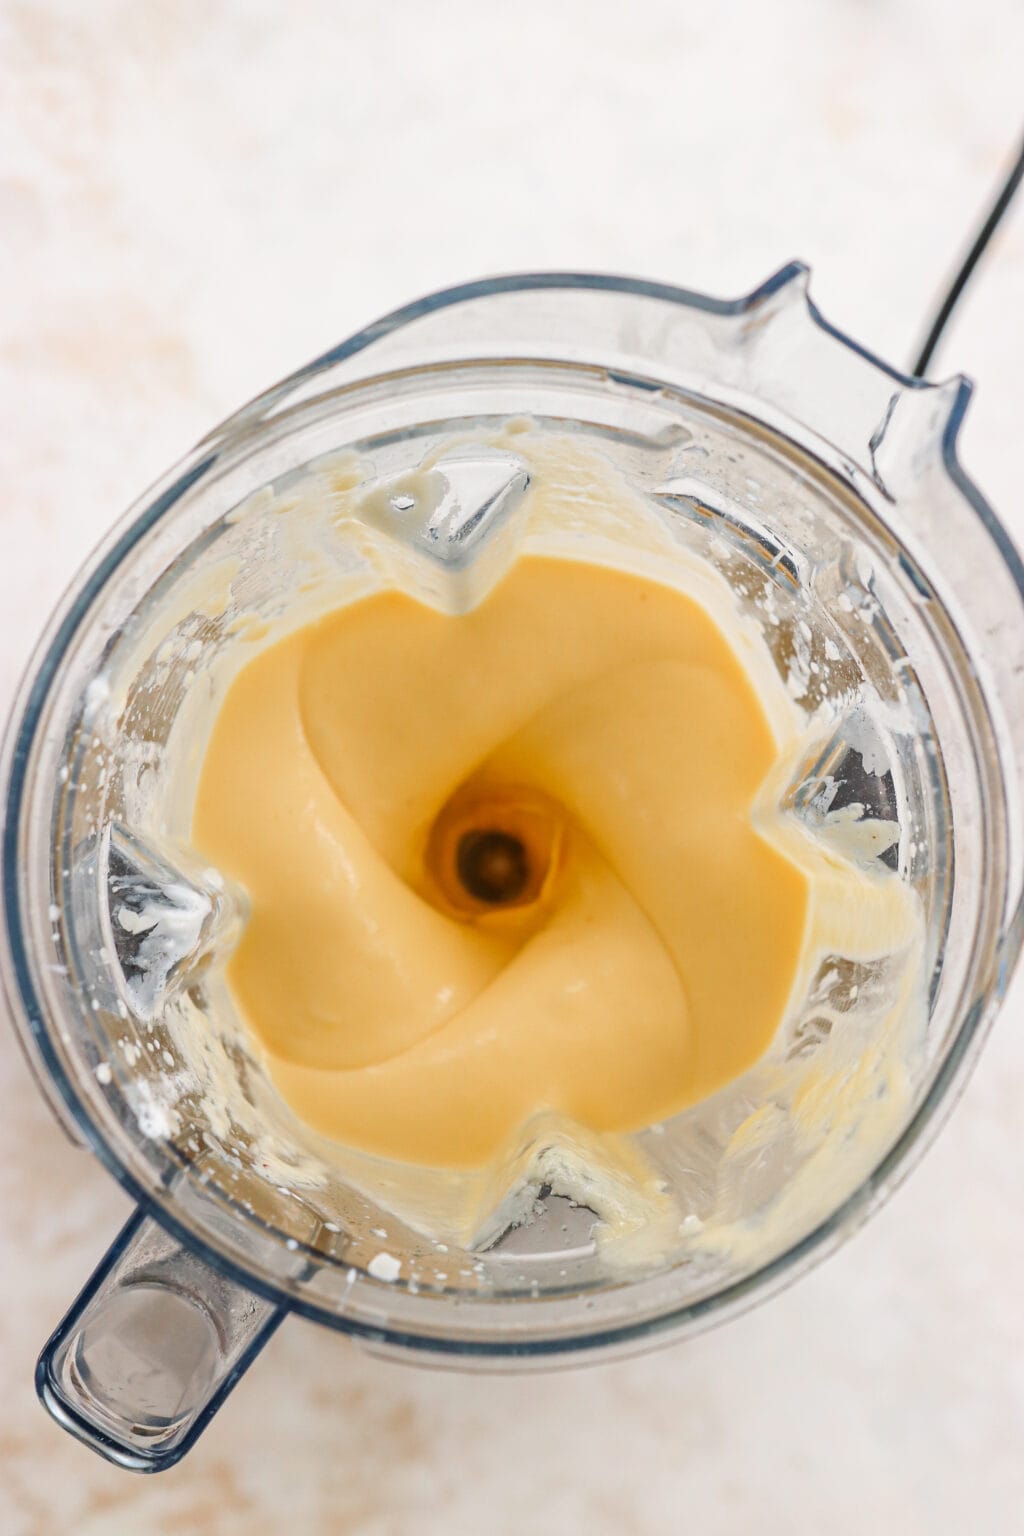 This is an overhead shot of a mango and pineapple smoothie being blended in a vitamix. The smoothie is orange in color and there are splashes of smoothie on the sides.